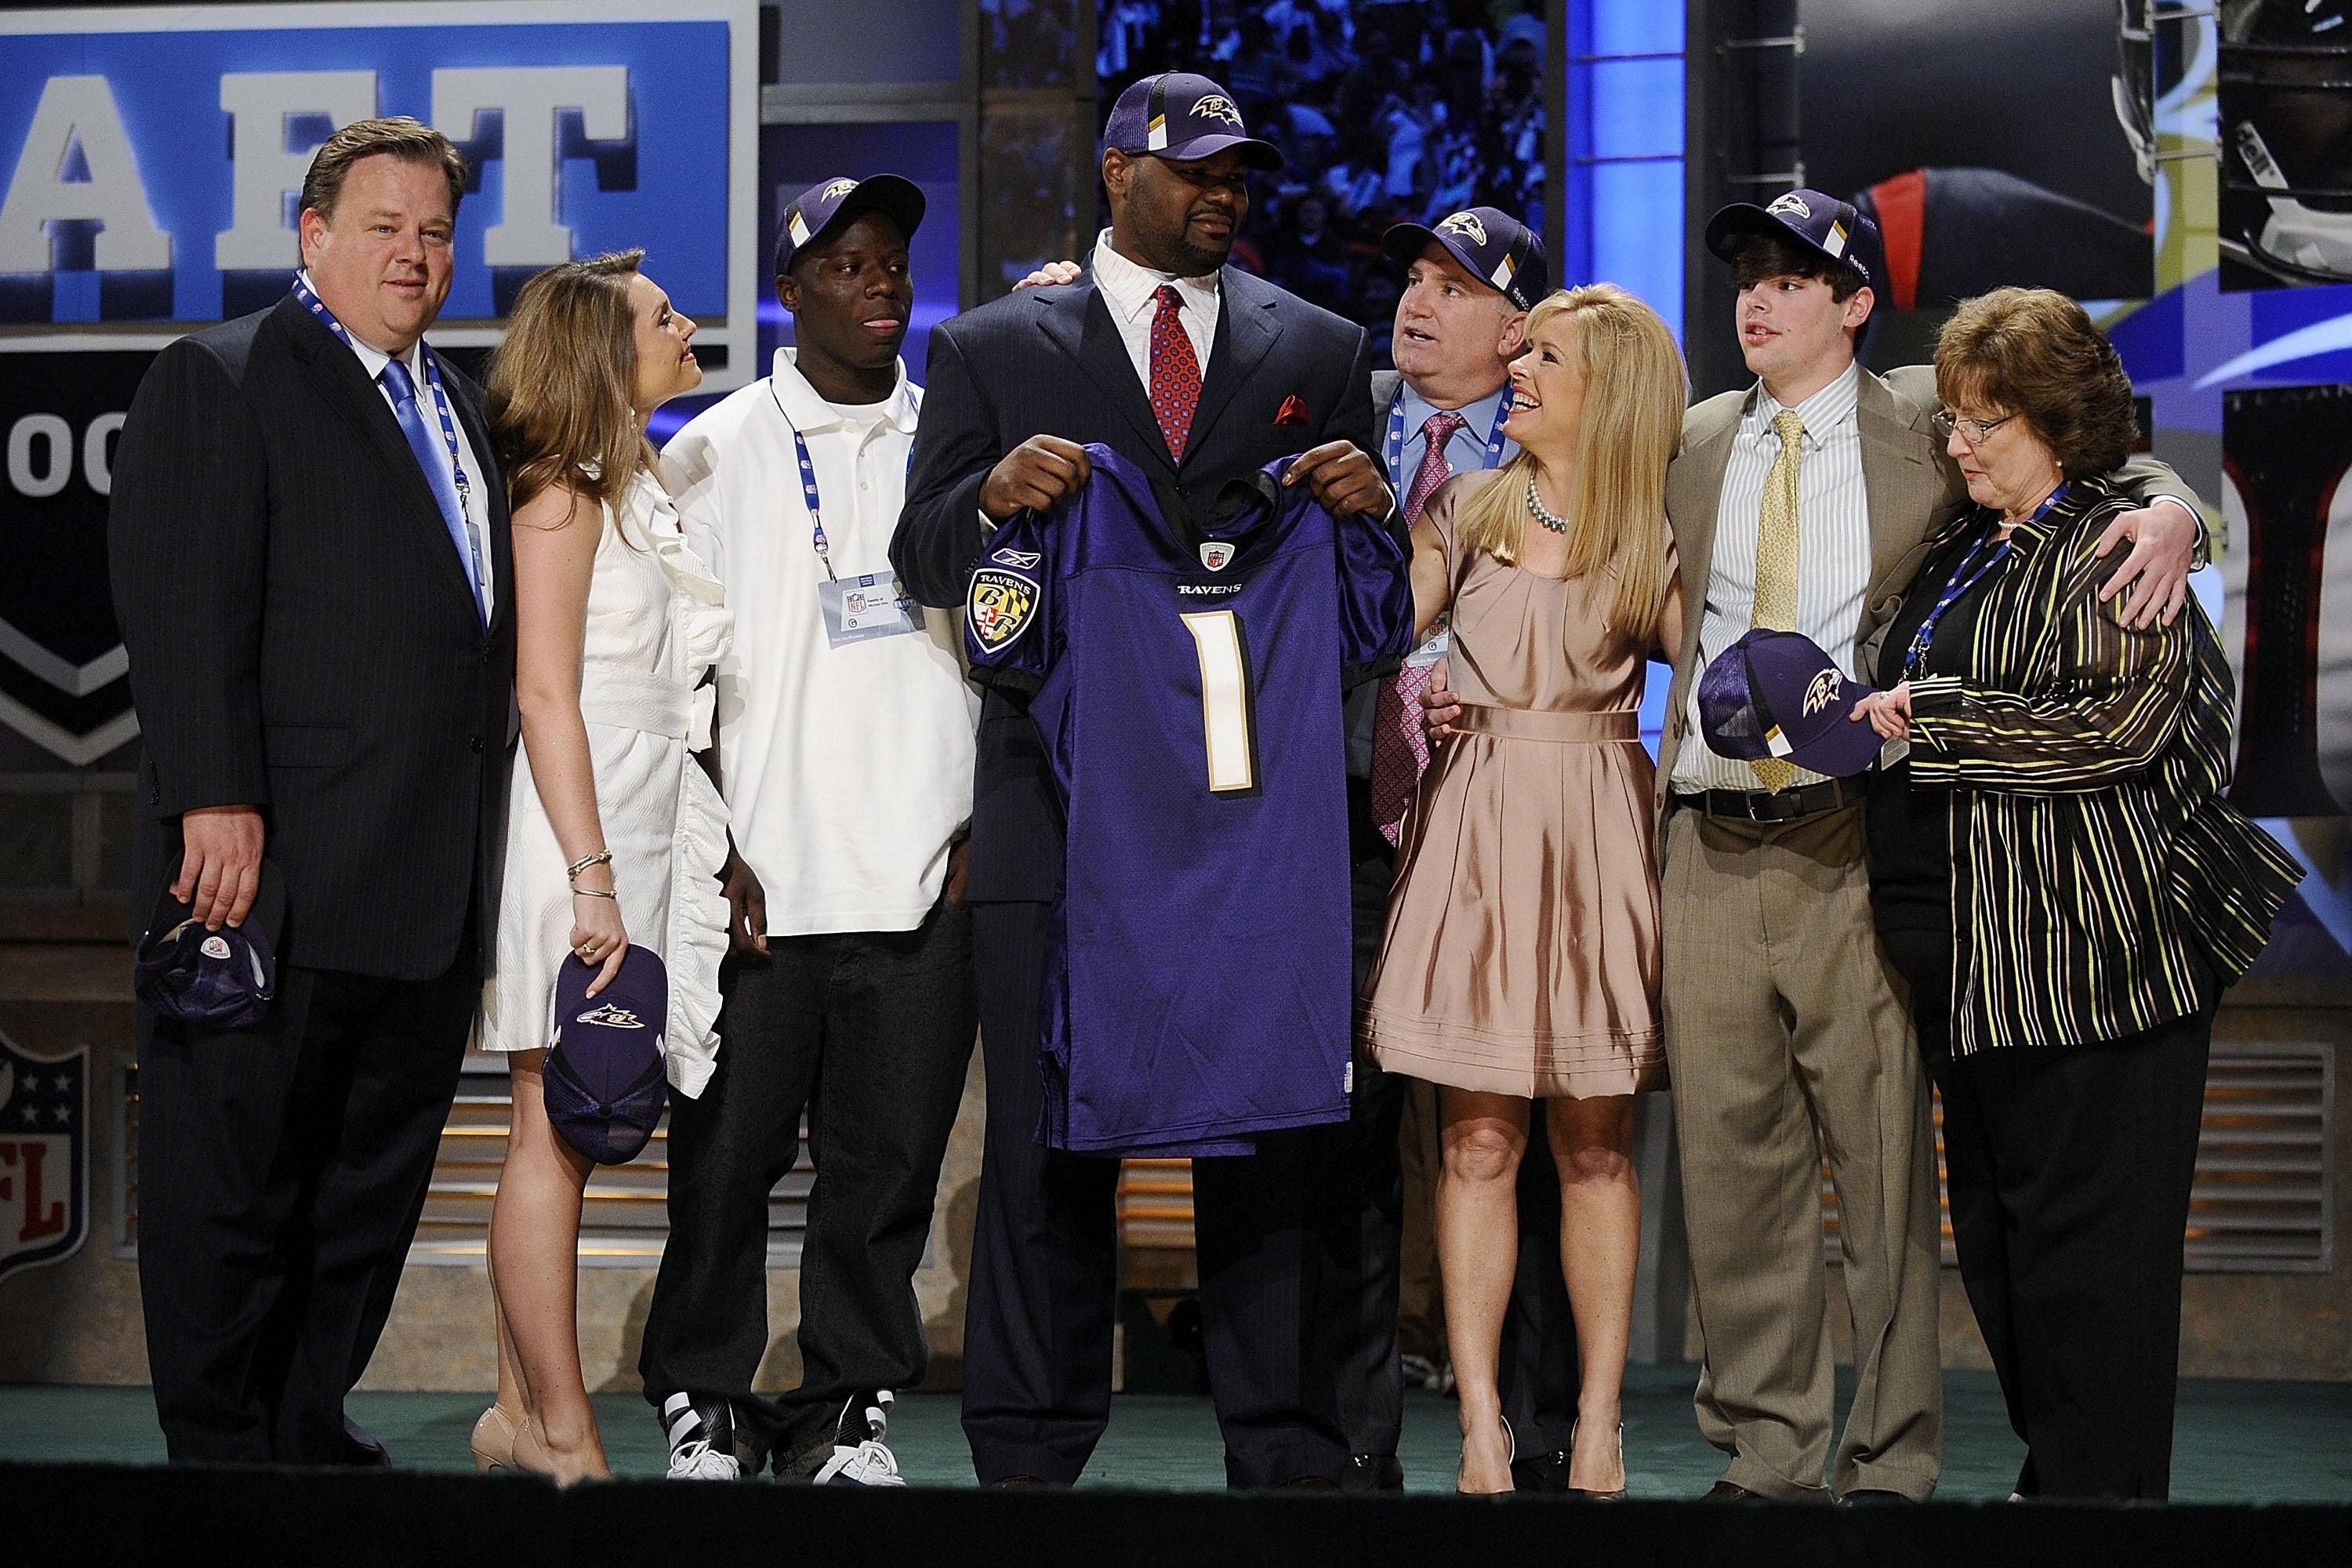 Michael Oher, at center, holds up a Baltimore Ravens jersey while surrounded by the Tuohys and others.